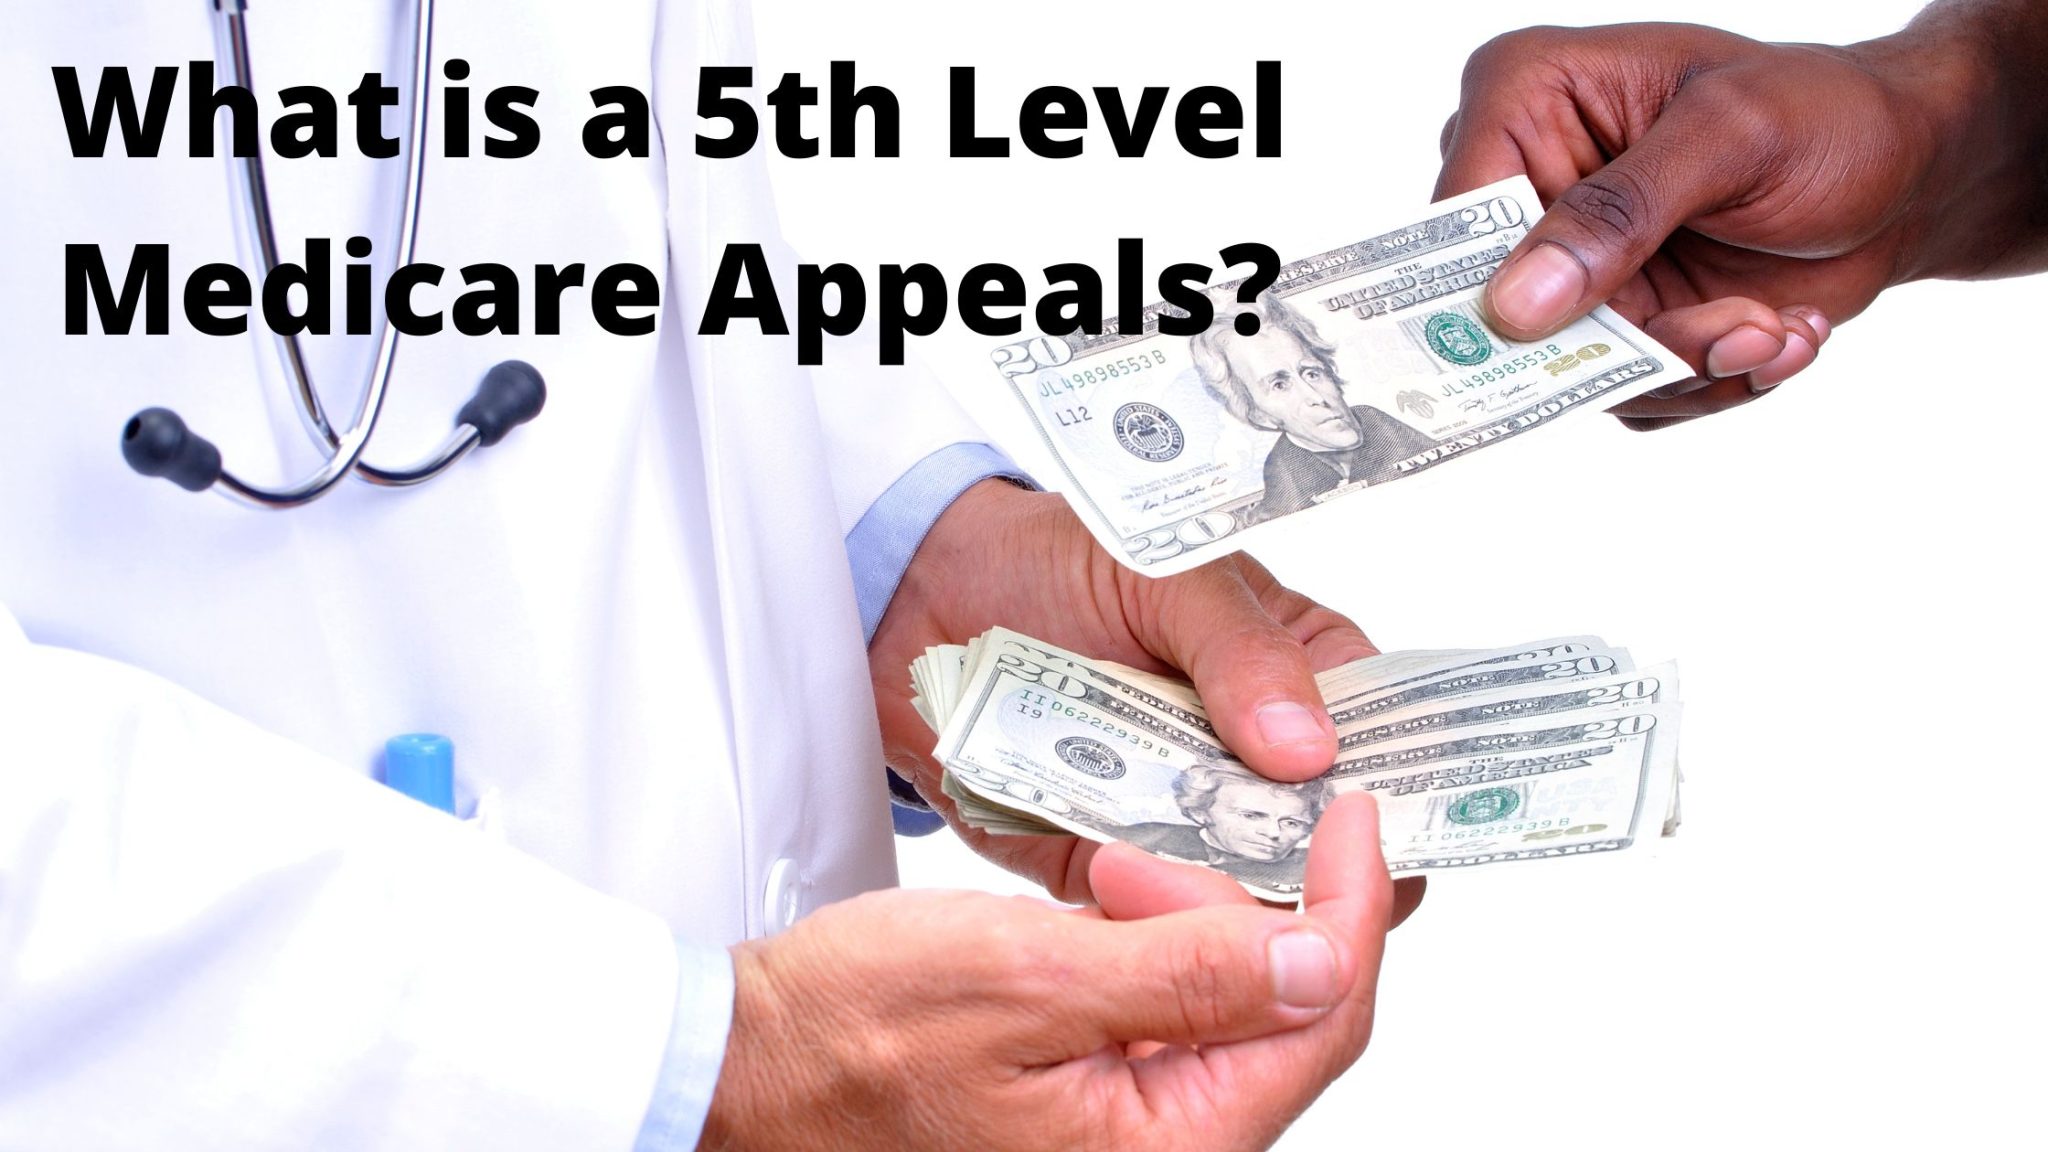 The Complete Guide To Winning A Medical Appeal At The 5th Level Of Medicare Appeals 0578